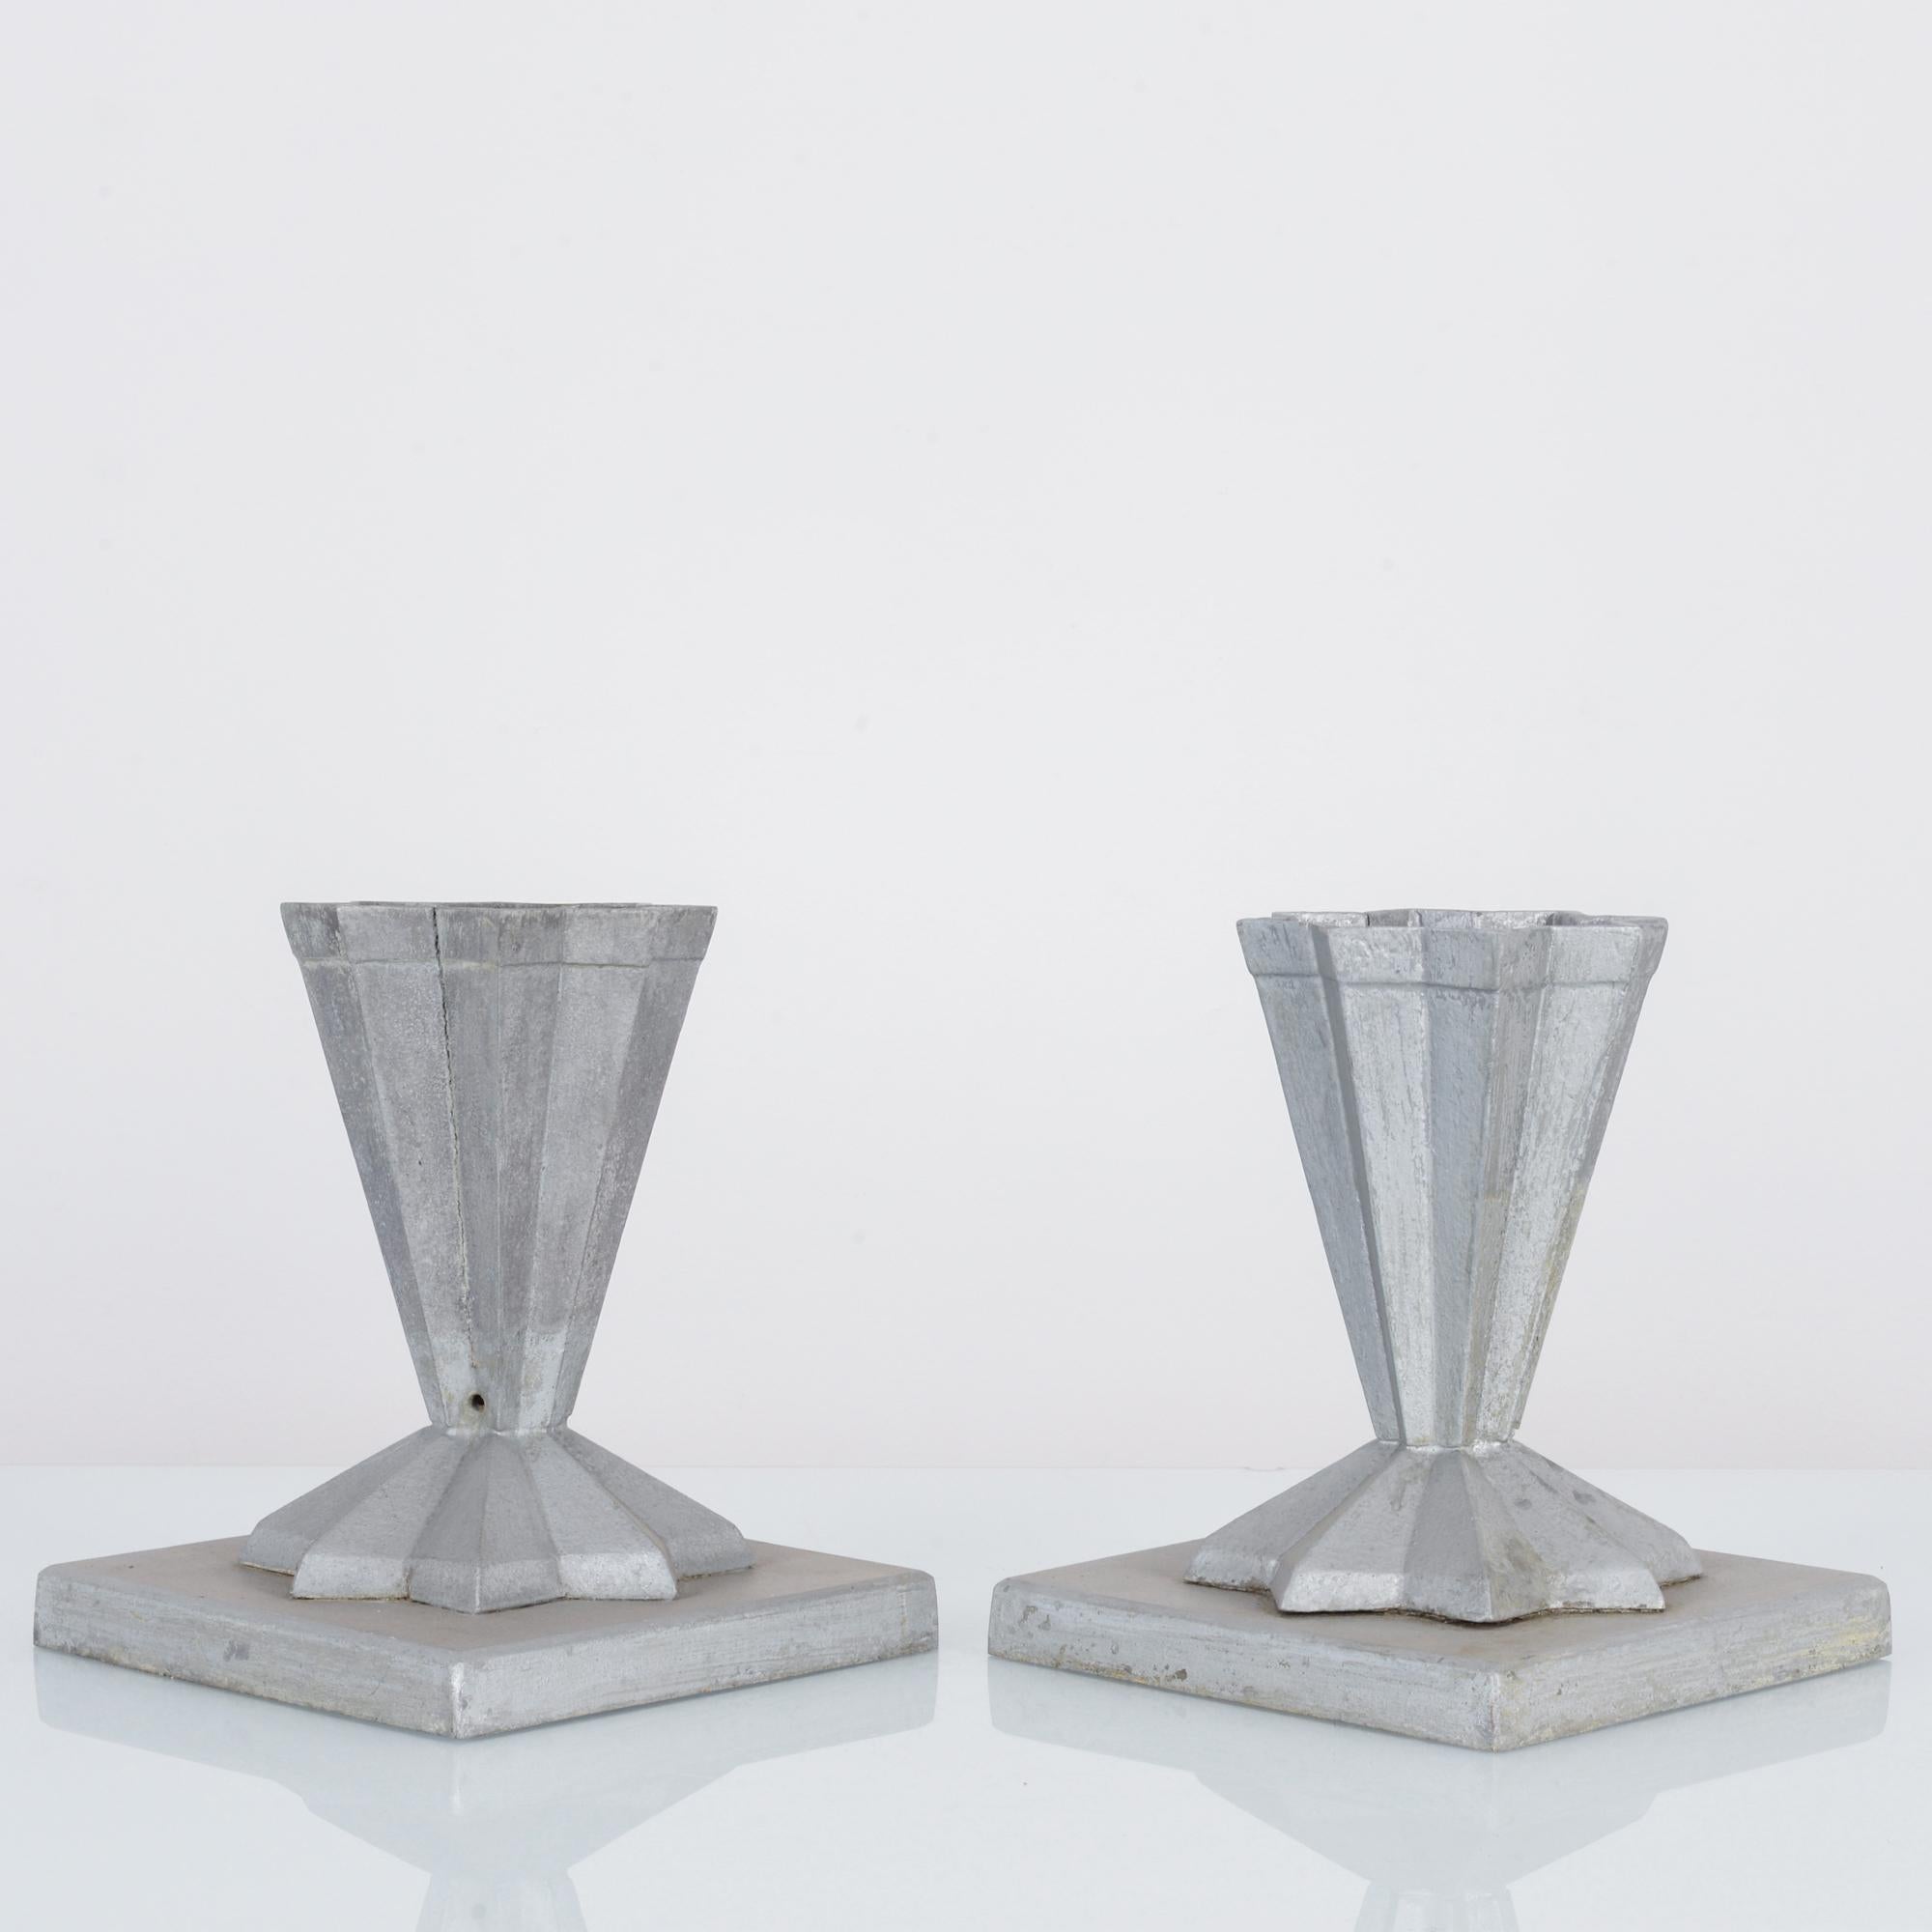 Art Deco Early 20th Century French Cast Aluminum Planters, a Pair